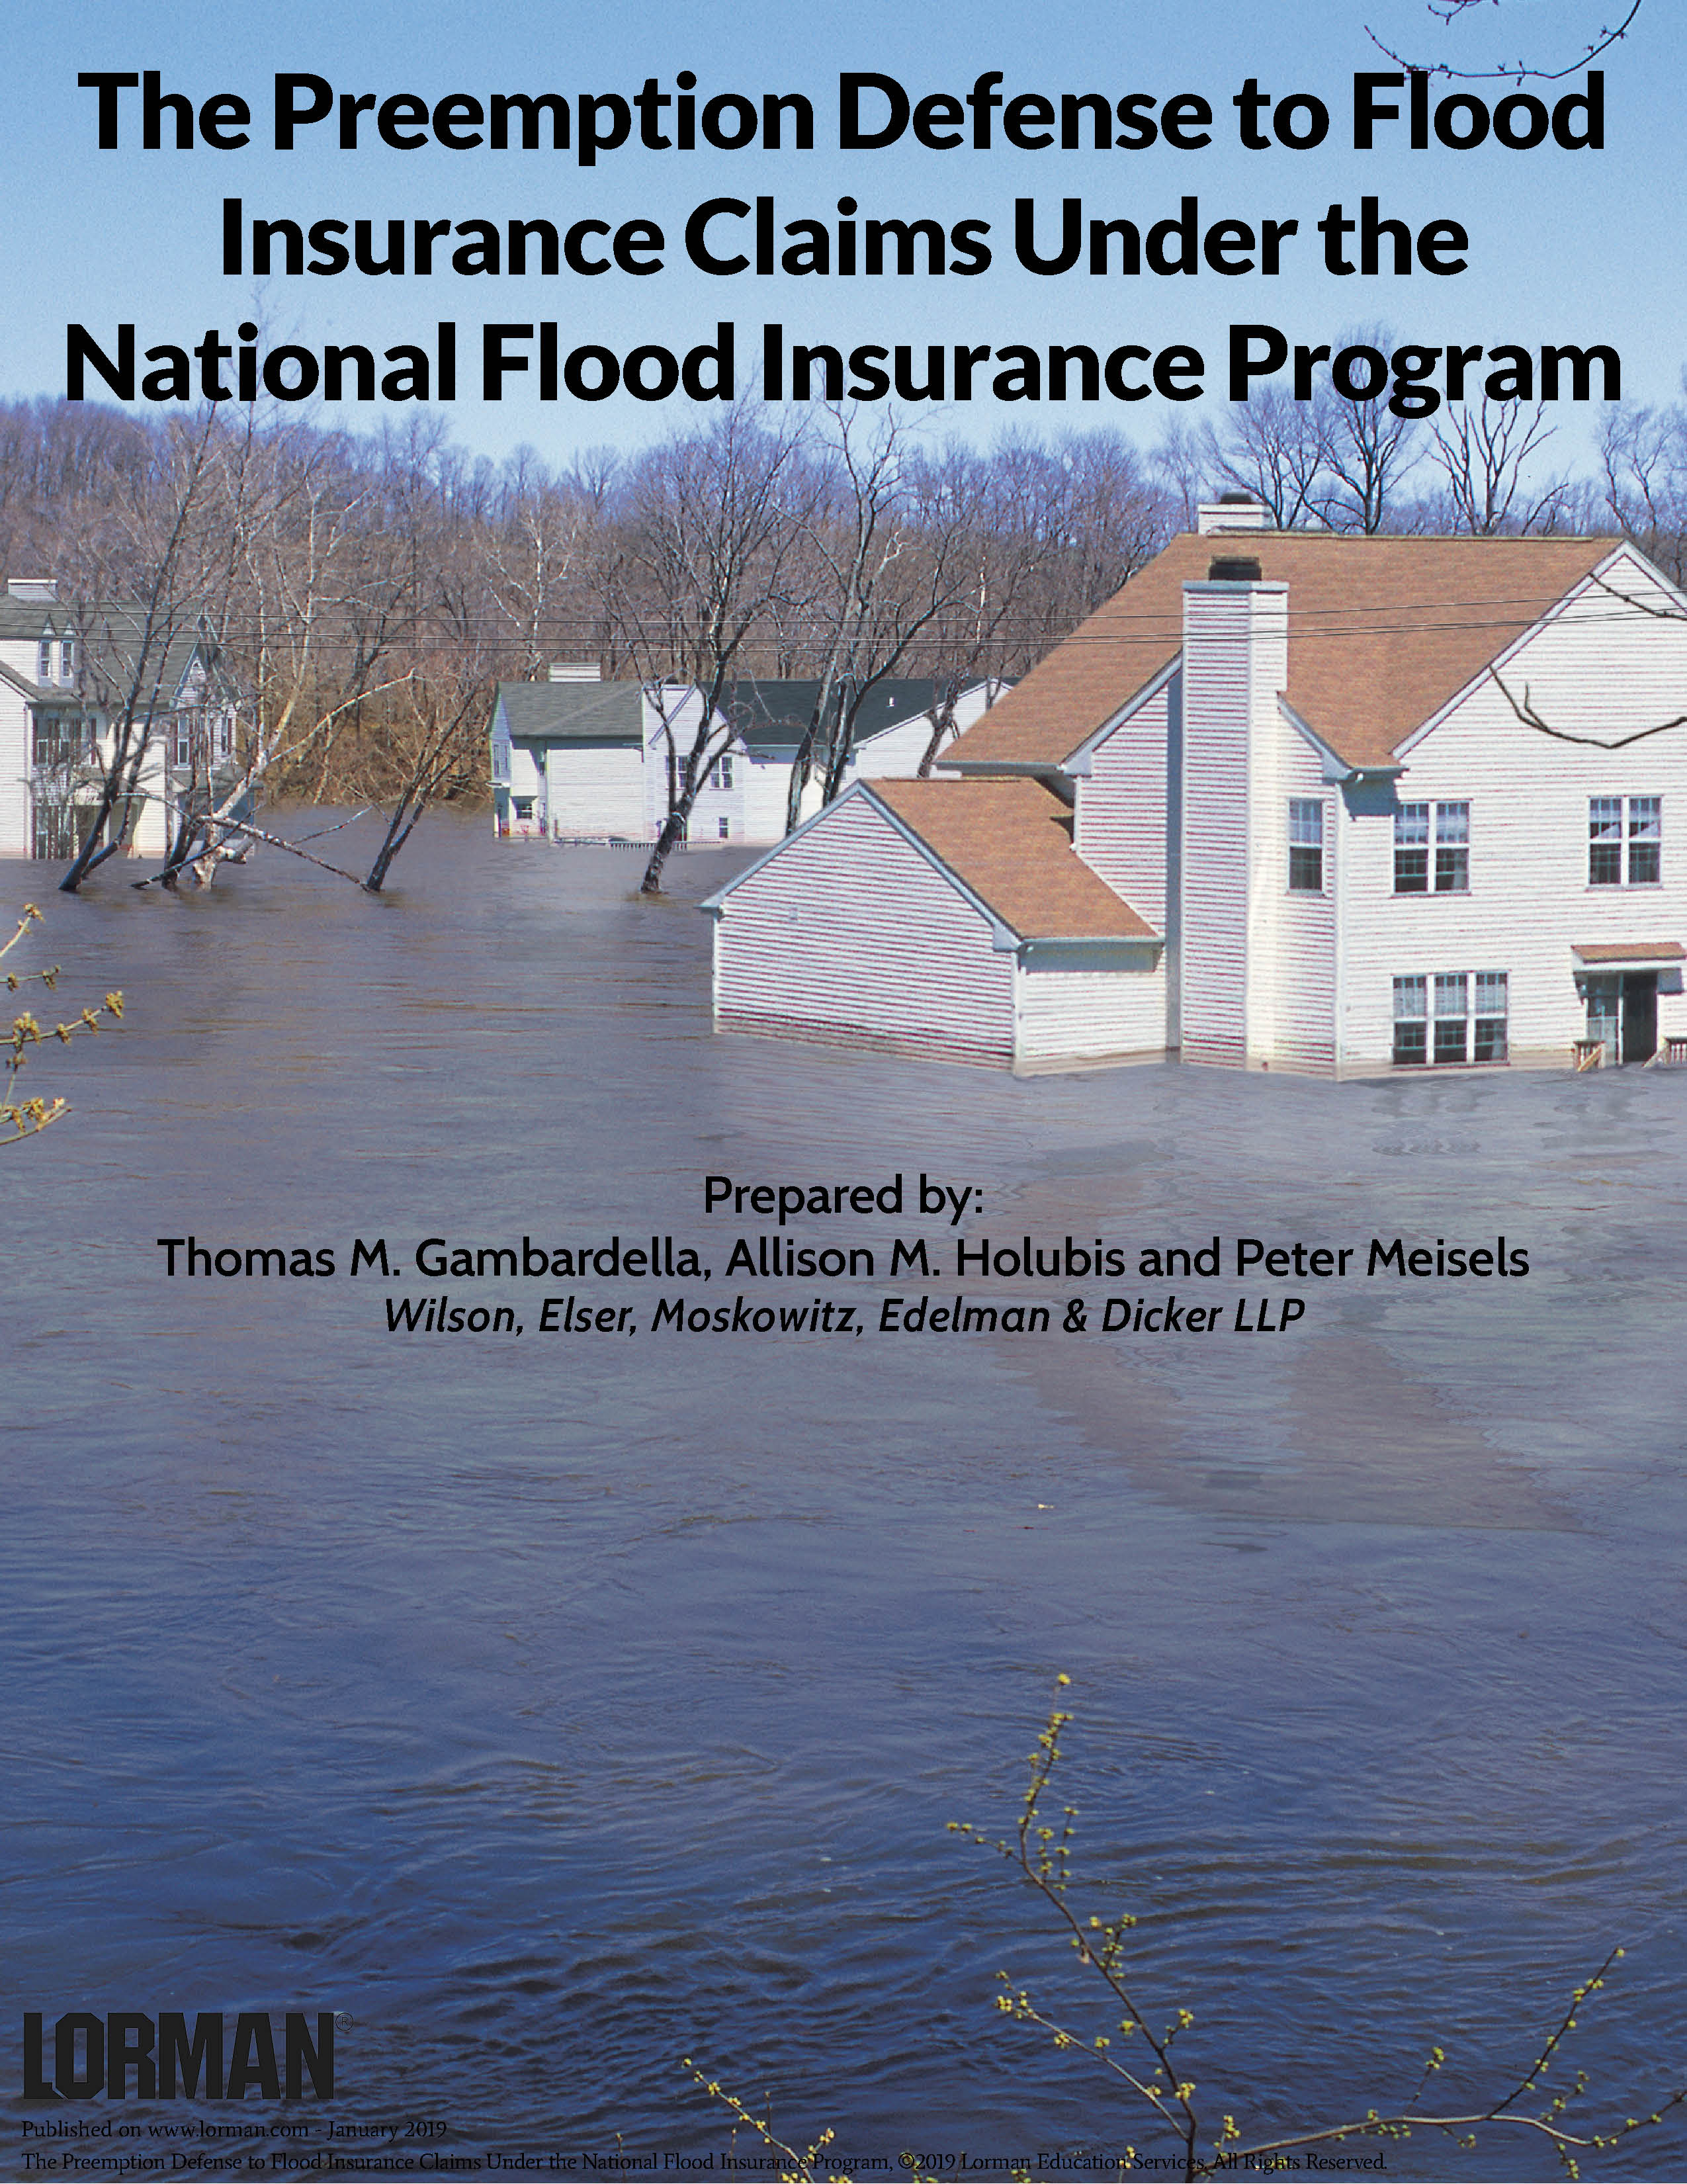 The Preemption Defense to Flood Insurance Claims Under the National Flood Insurance Program